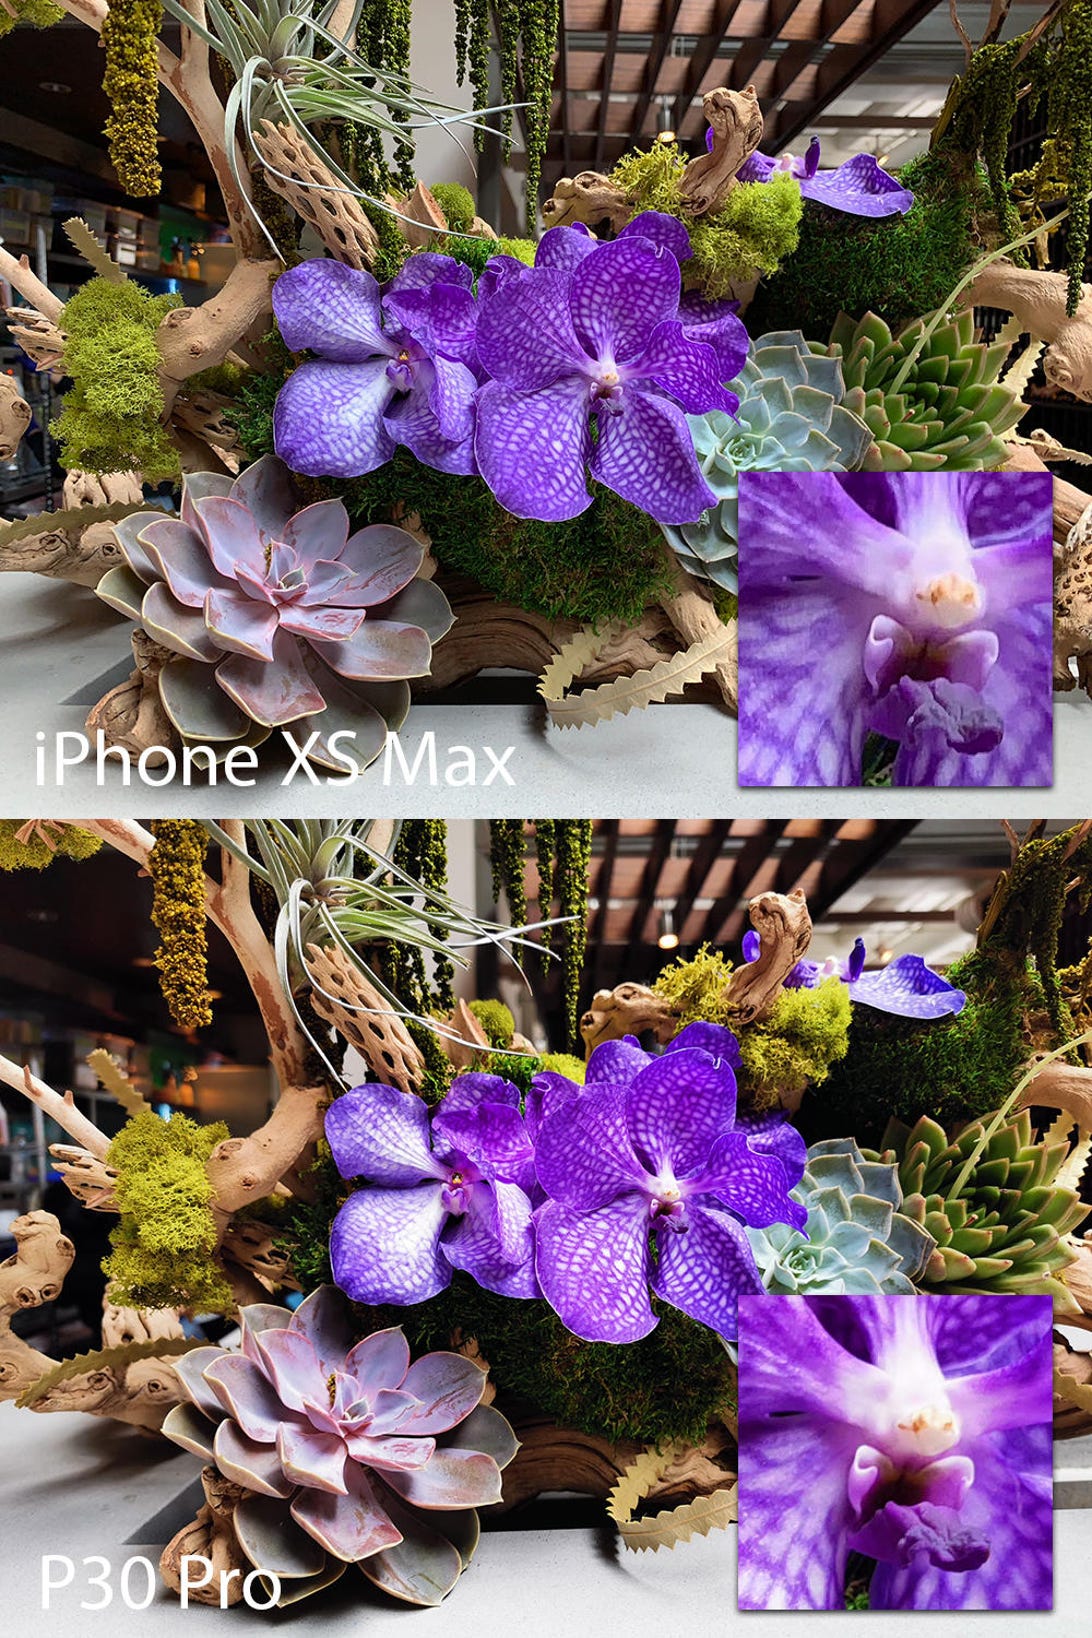 iPhone XS Max vs. Huawei P30 Pro: Which camera is best?